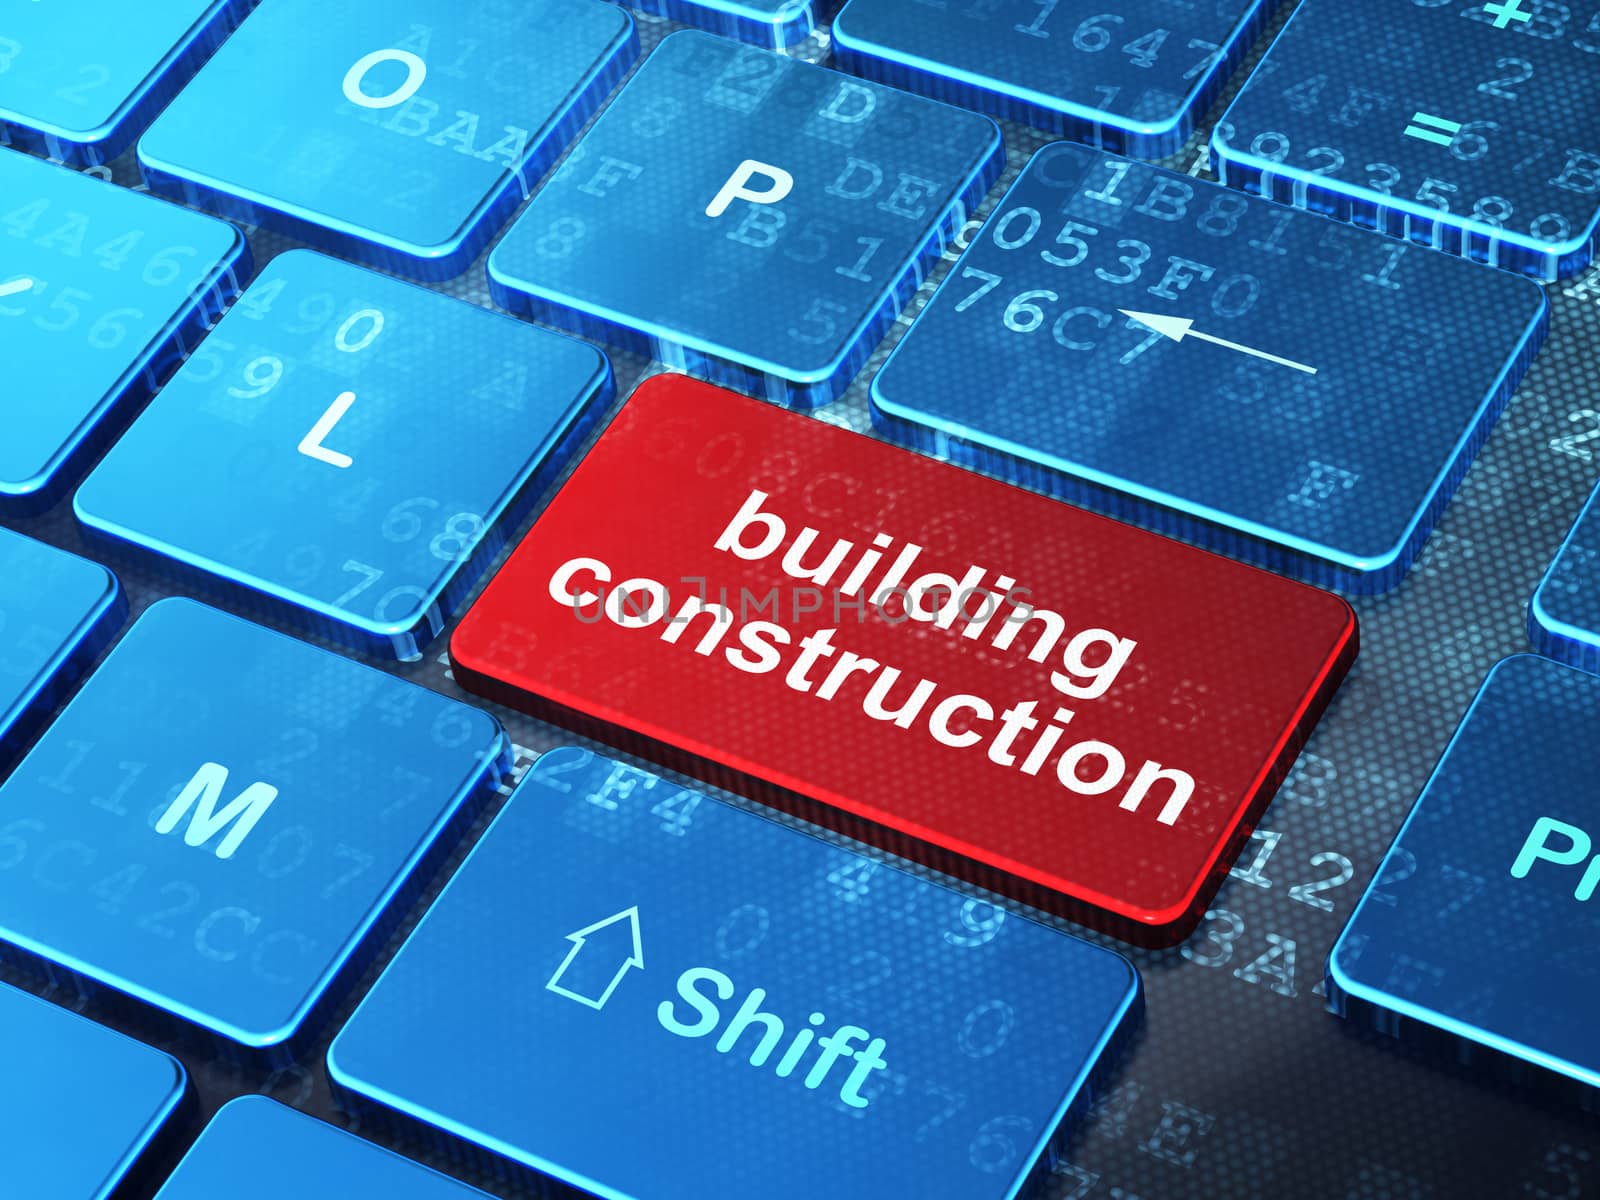 Building construction concept: Building Construction on computer keyboard background by maxkabakov